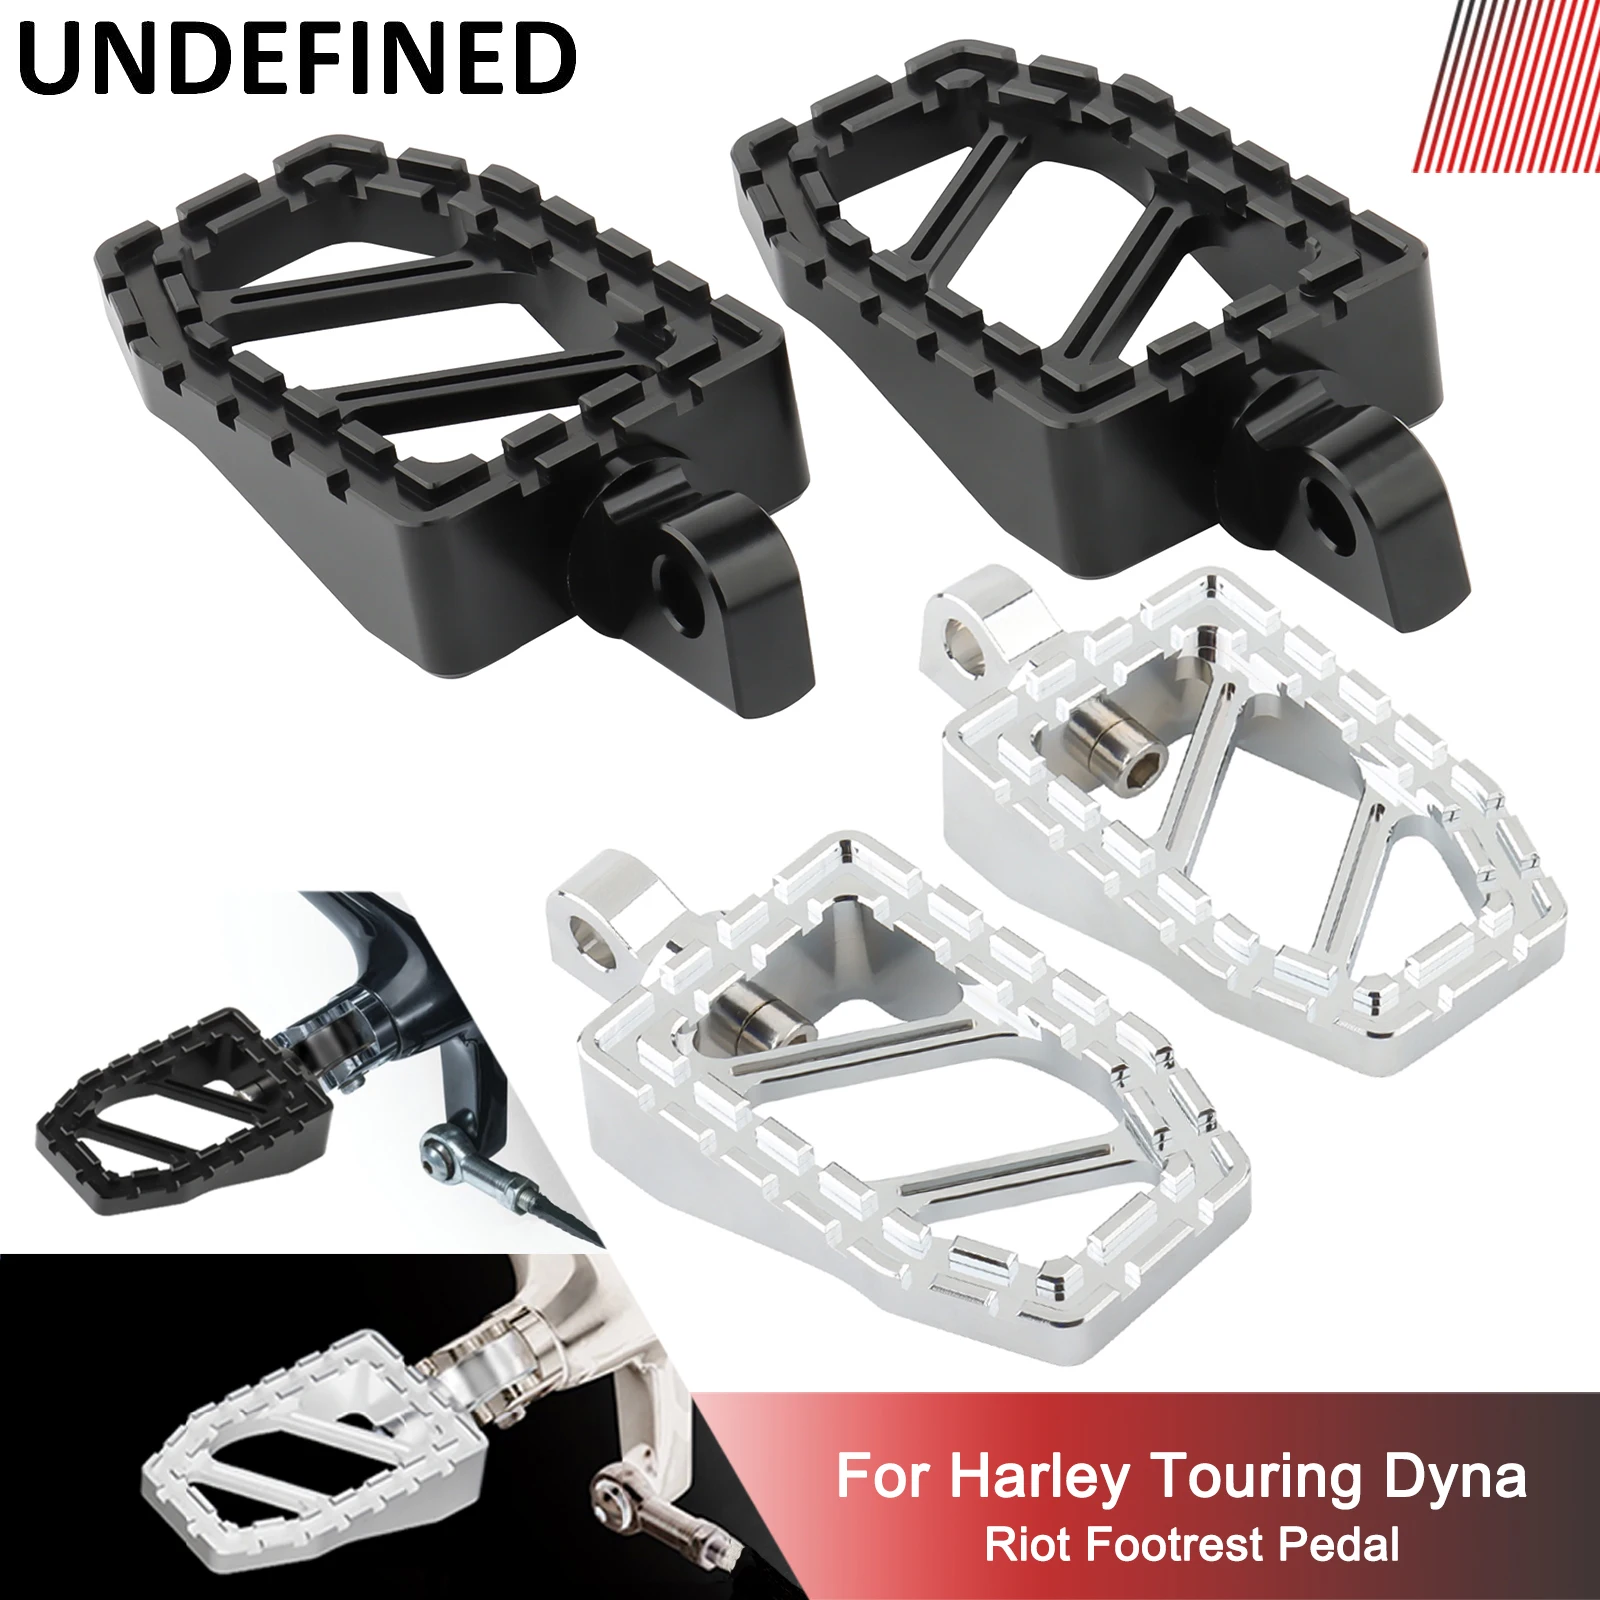 Riot Footpegs for Harley Touring Road Sportster 883 Softail Slim Road King Dyna FXDF Chopper Bobber Footrest Pedals Footrests